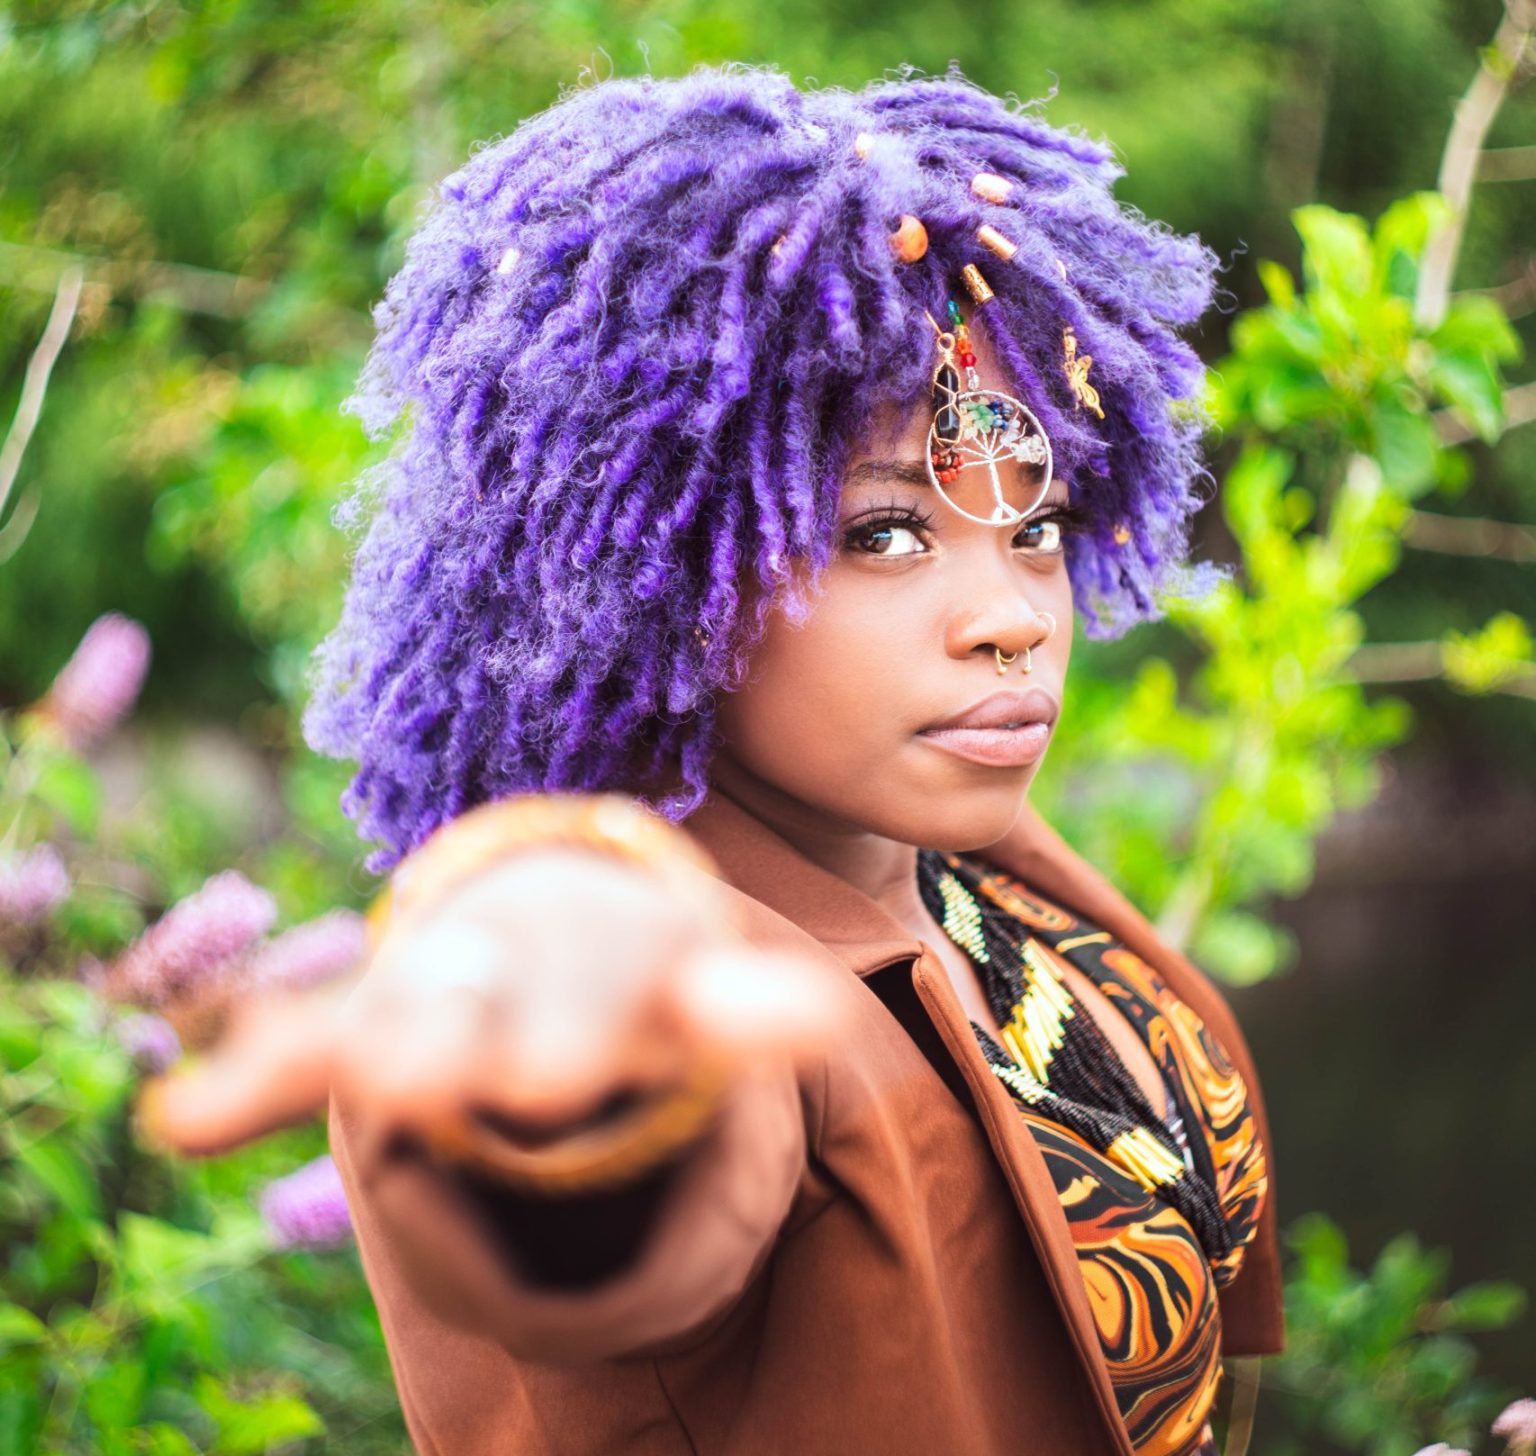 A close up portrait of Eyve. She has a purple afro and is wearing a charm which dangles over her face. Her hand is outstretched towards the camera.